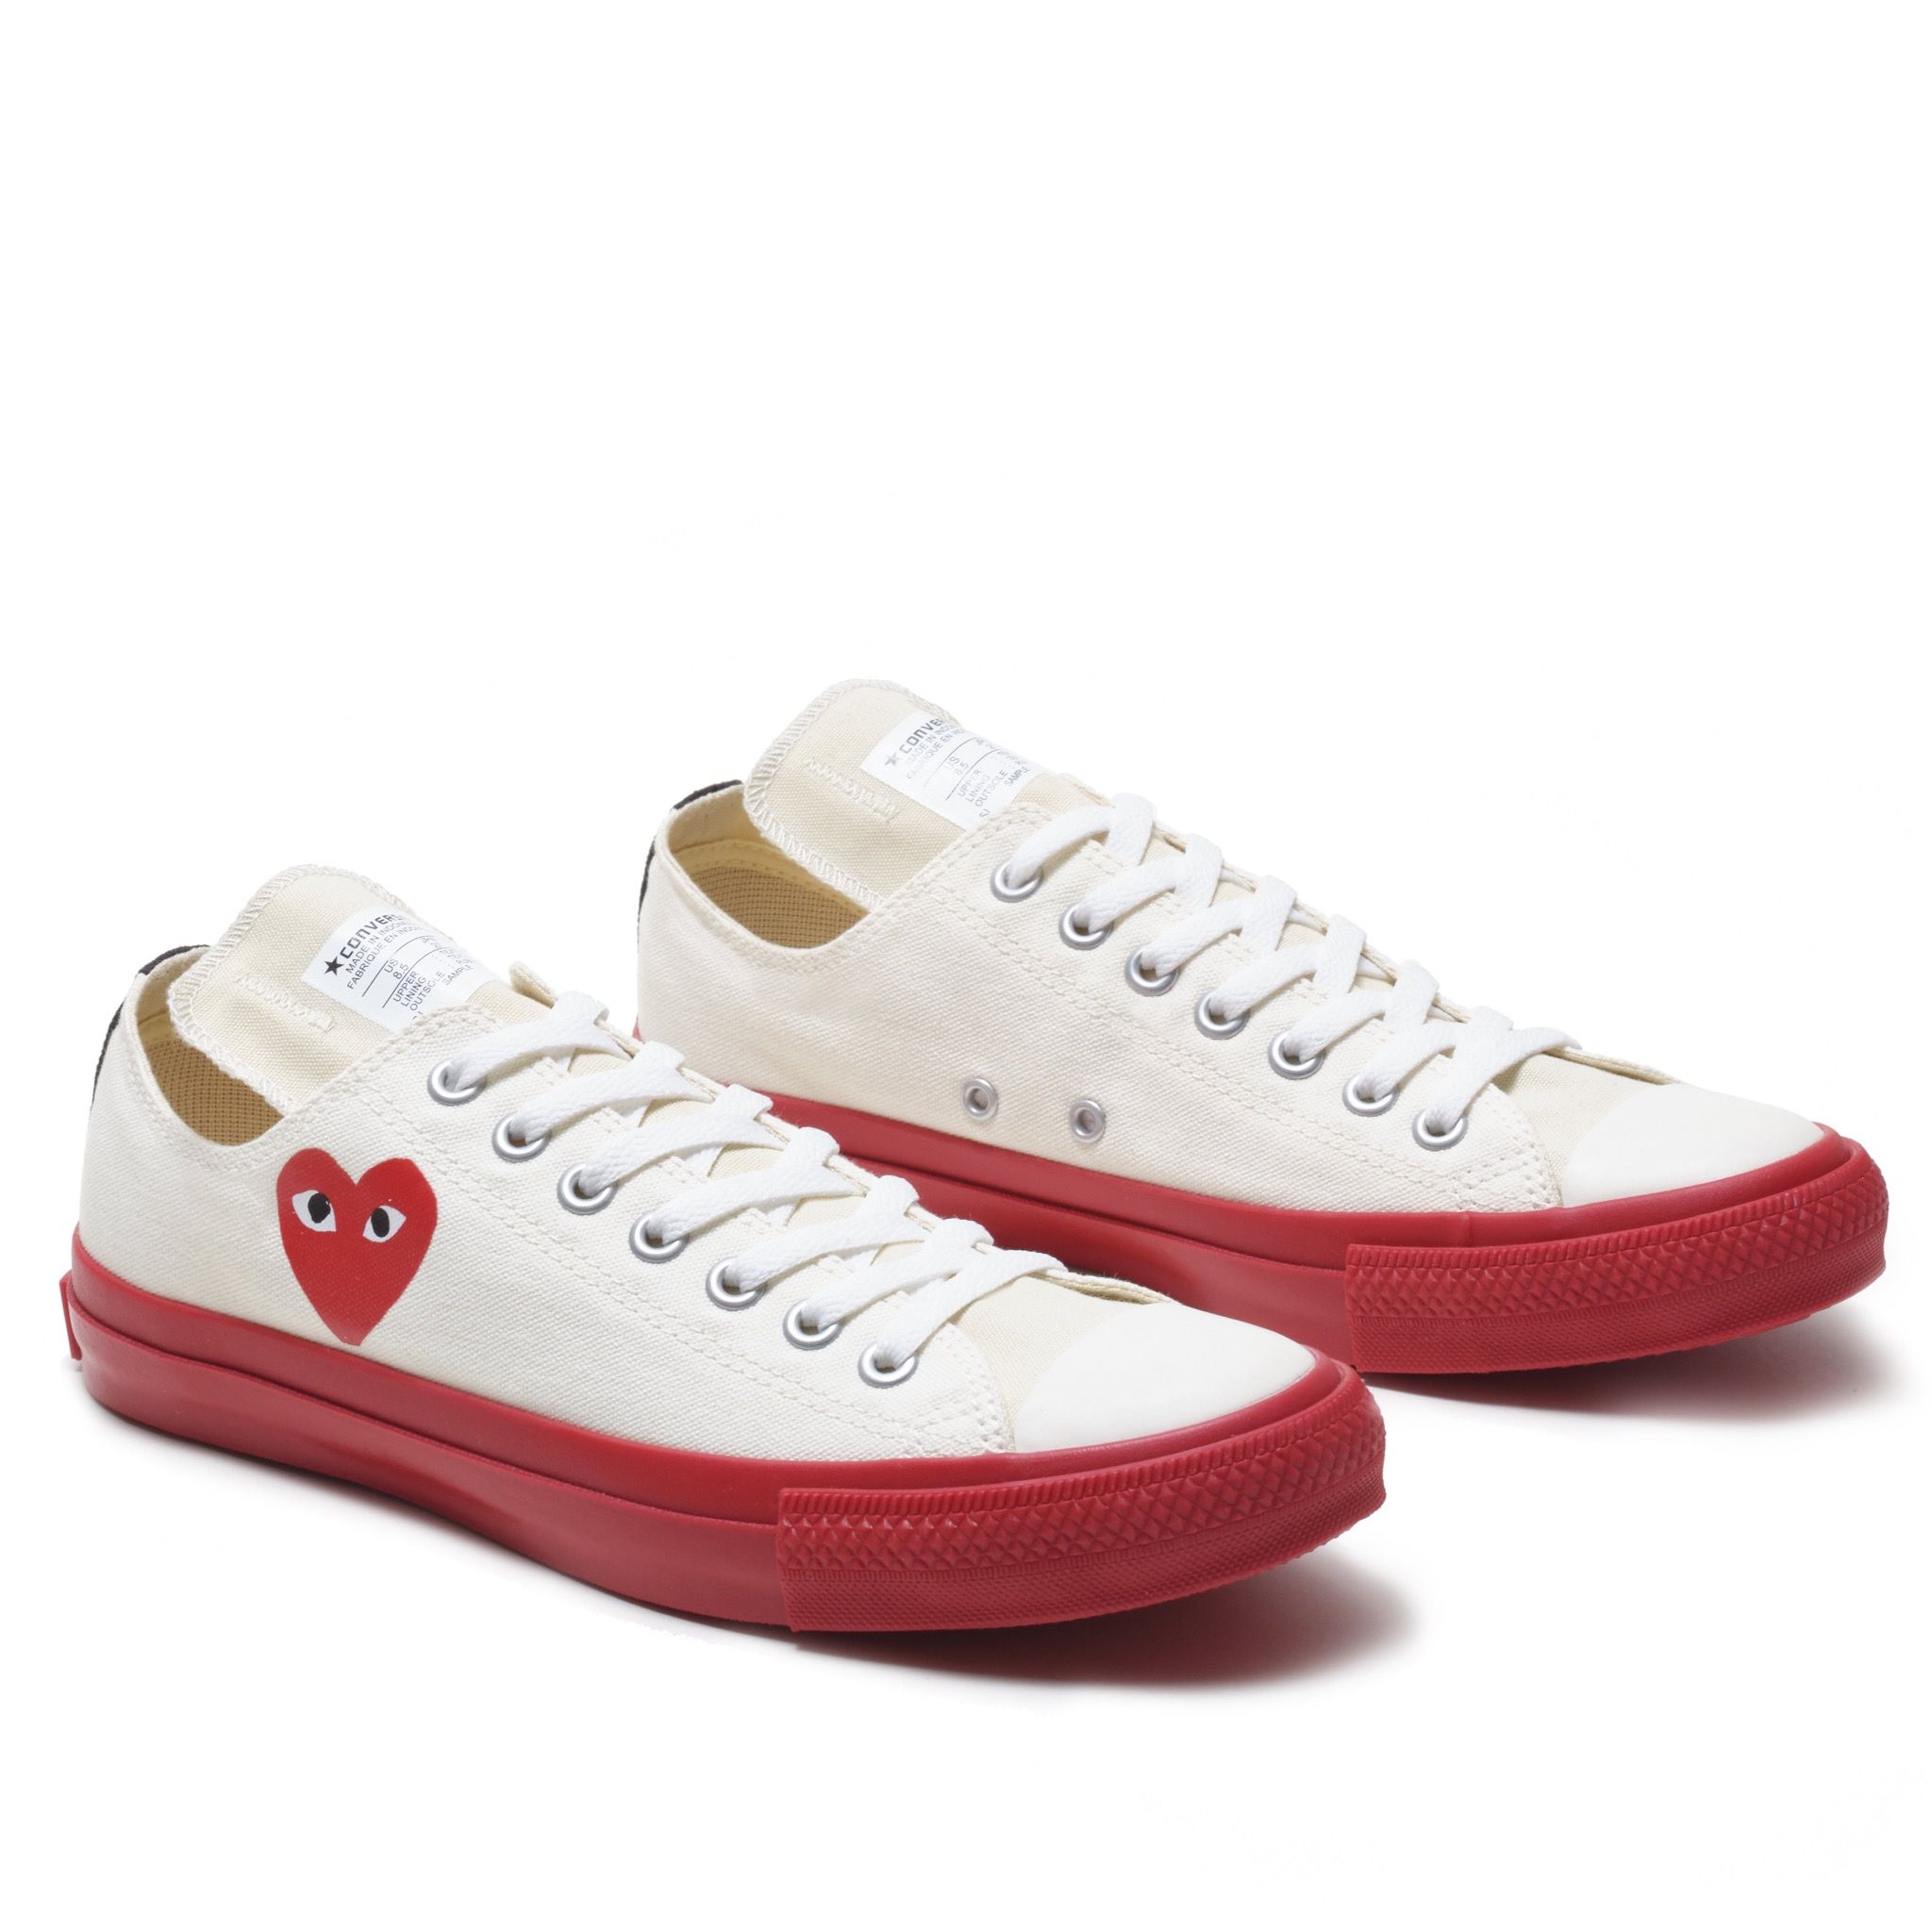  Comme des Garcons PLAY x Converse Chuck Taylor Low - Off White / Red 